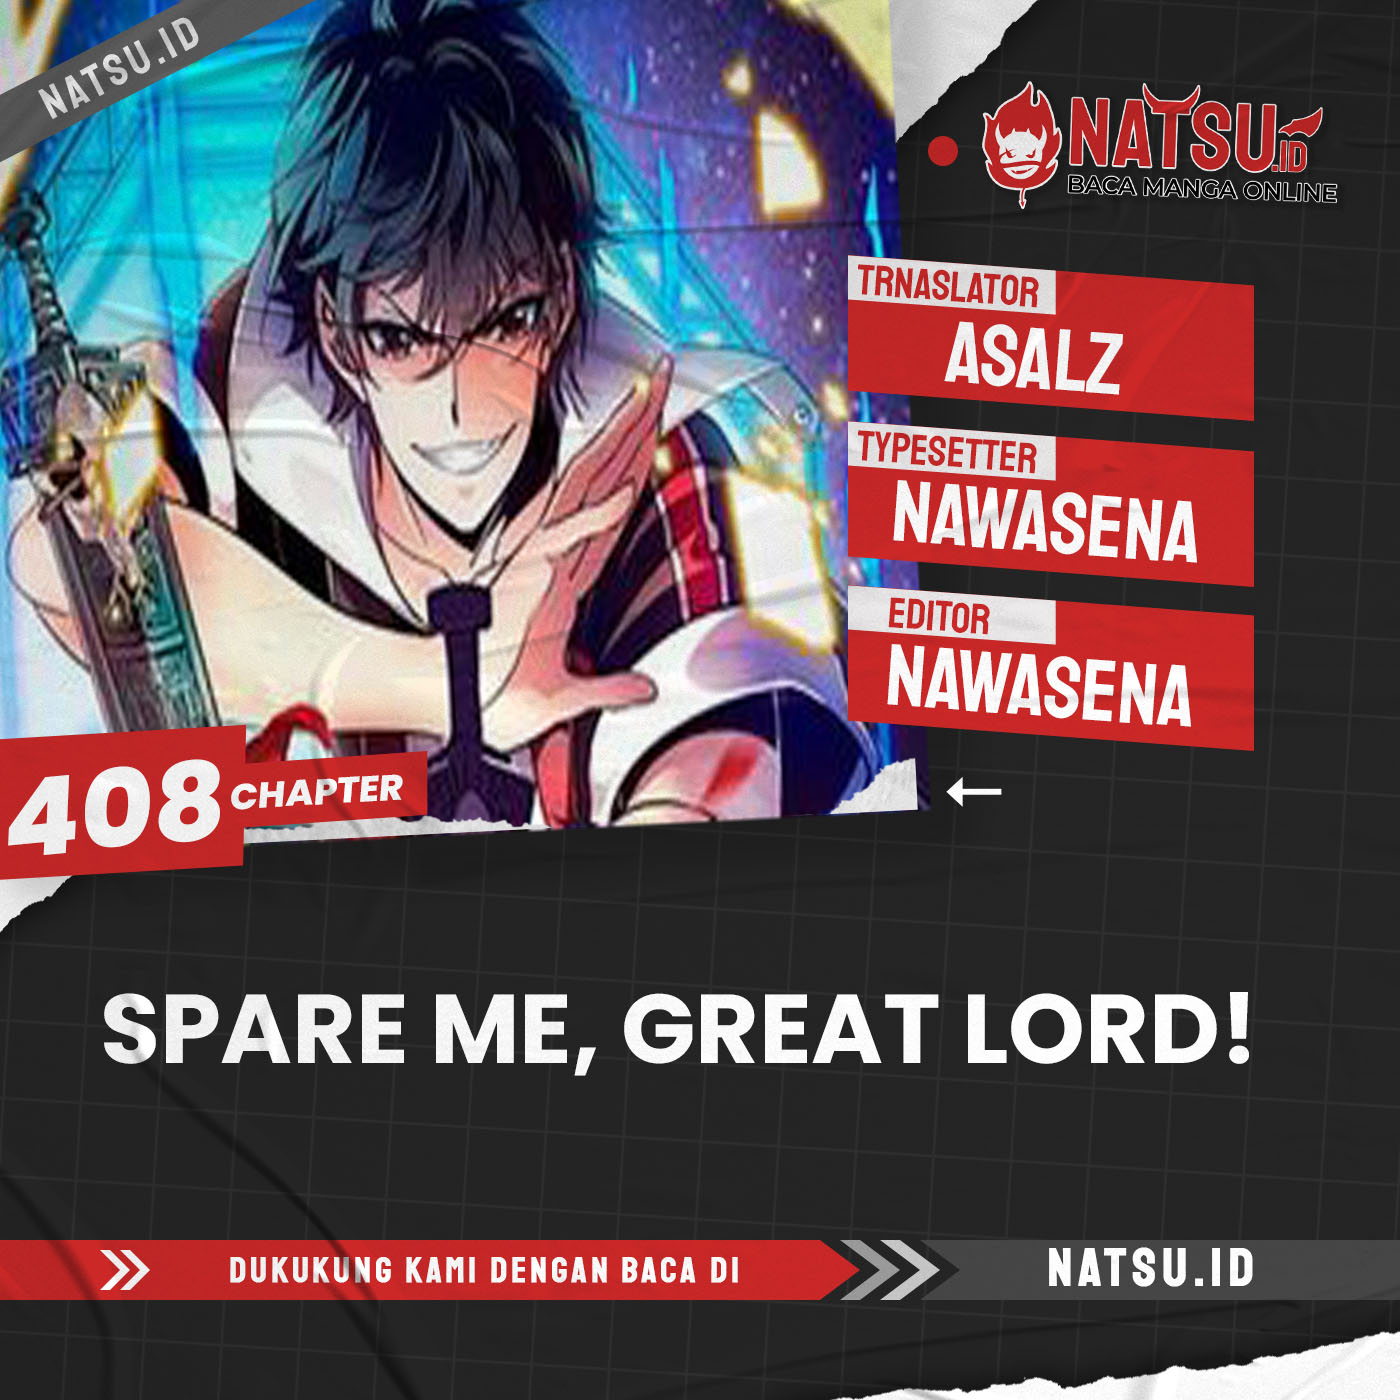 Spare Me, Great Lord! Chapter 408